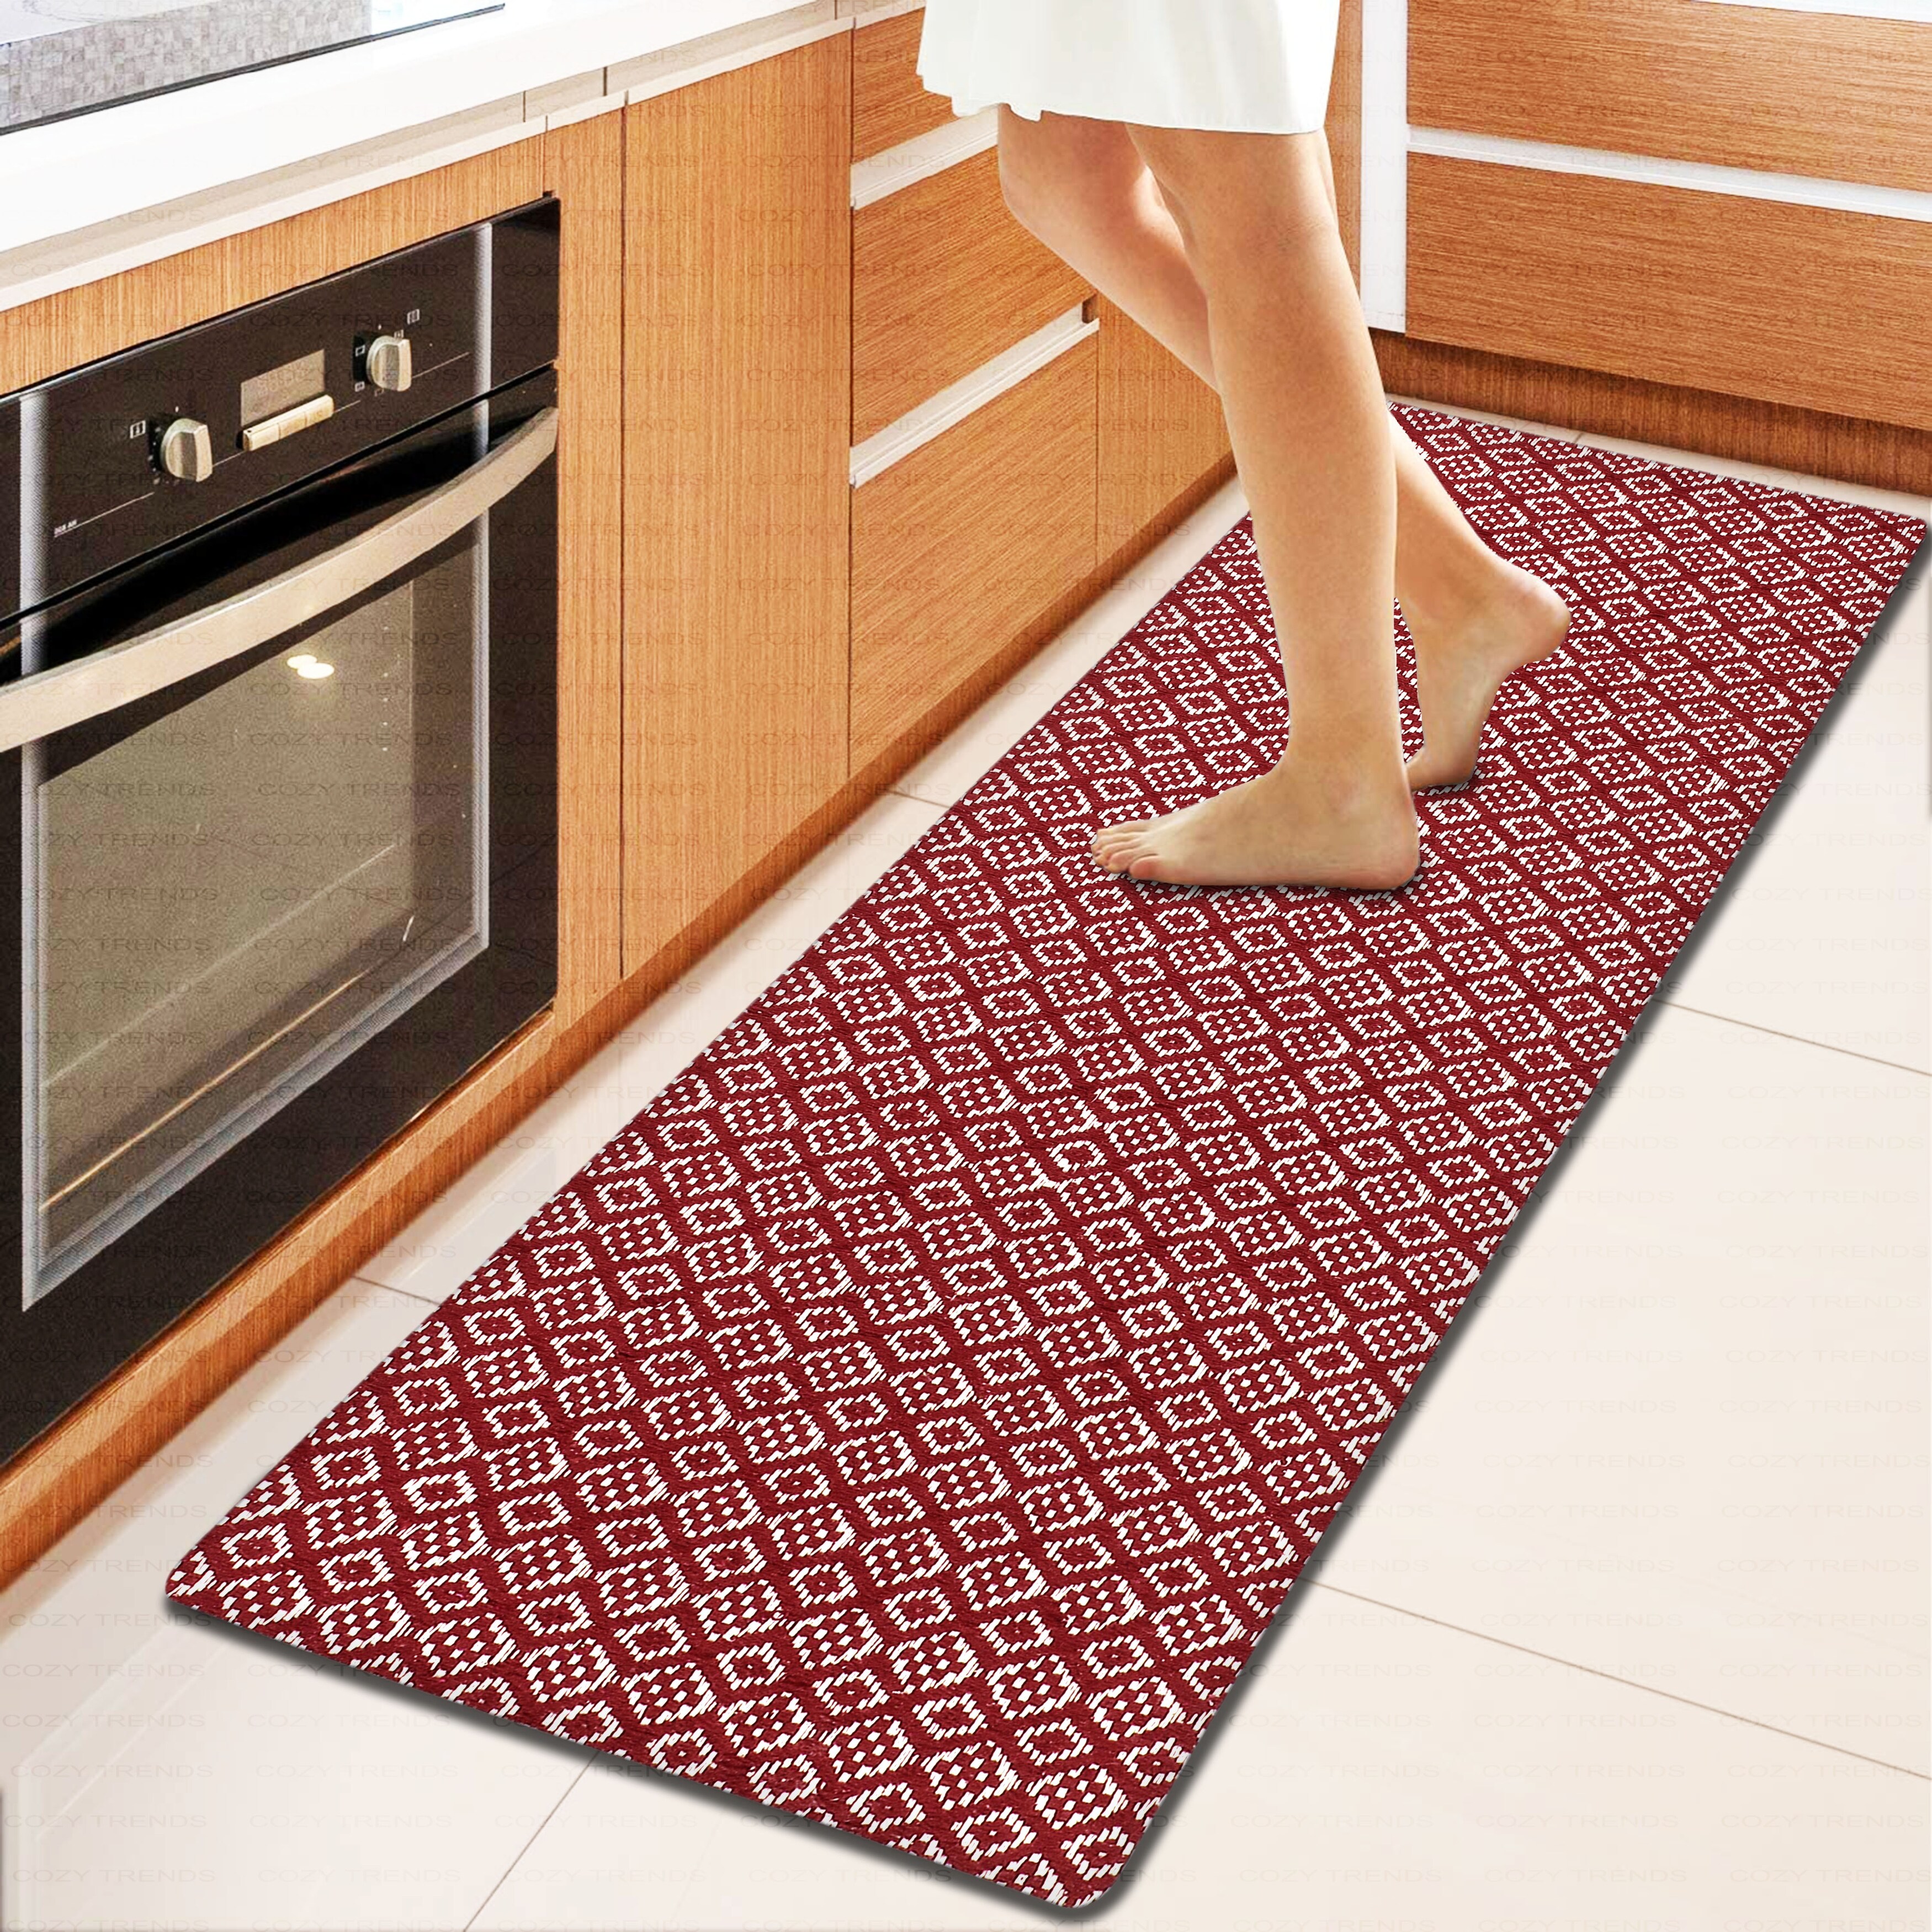 https://ak1.ostkcdn.com/images/products/is/images/direct/22278d55513cab9c8cc7a94b155371031e8ad193/Kitchen-Runner-Rug--Mat-Cushioned-Cotton-Hand-Woven-Anti-Fatigue-Mat-Kitchen-Bathroom-Bed-side-18x48%27%27.jpg